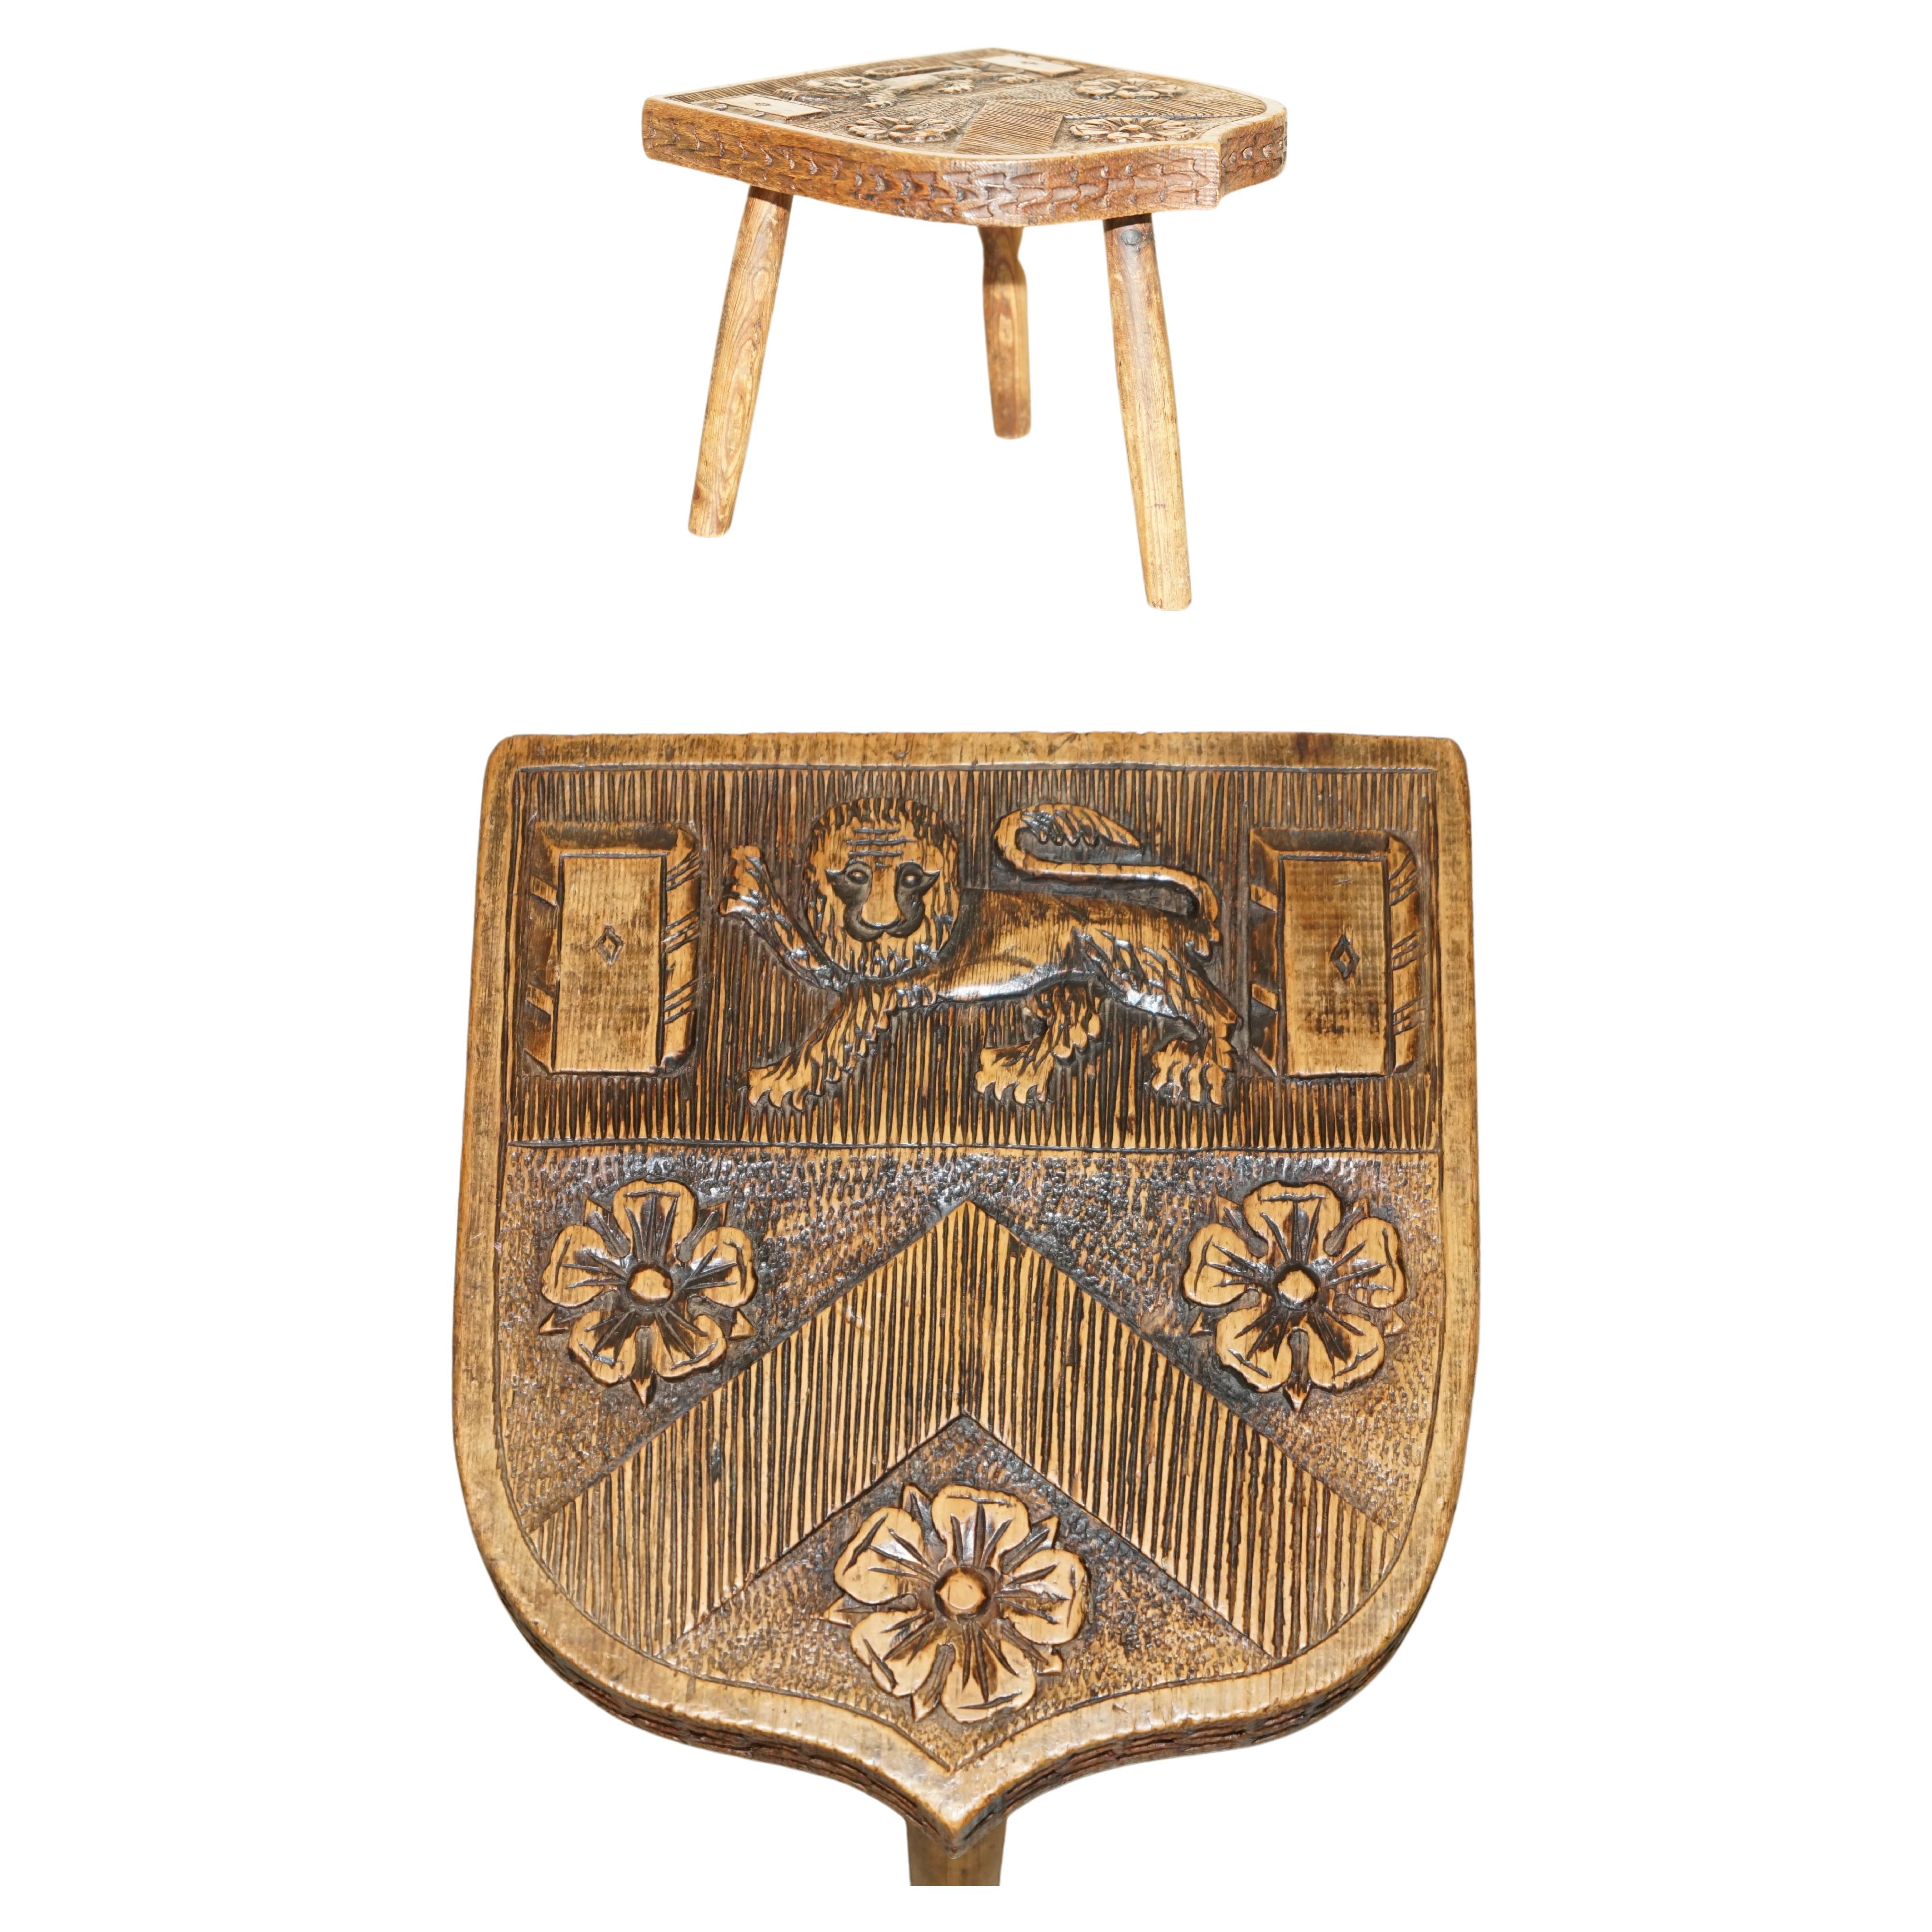 Antique 1575 Trinity College Cambridge Coat of Arms Armorial Crest Side Table For Sale